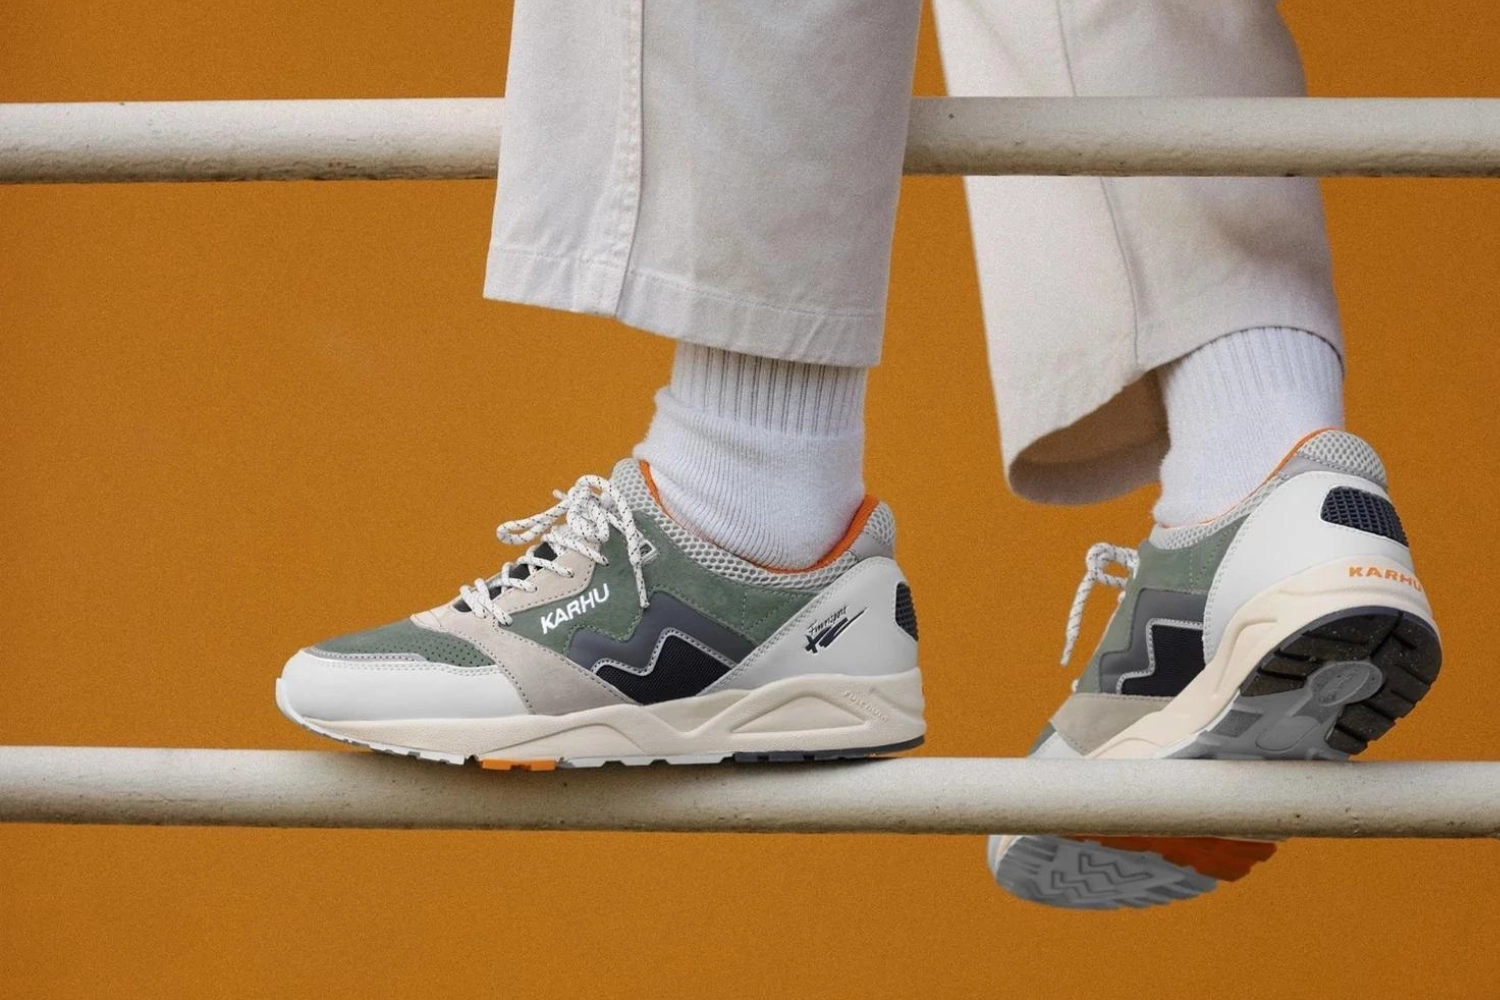 These popular Karhu colorways are still available